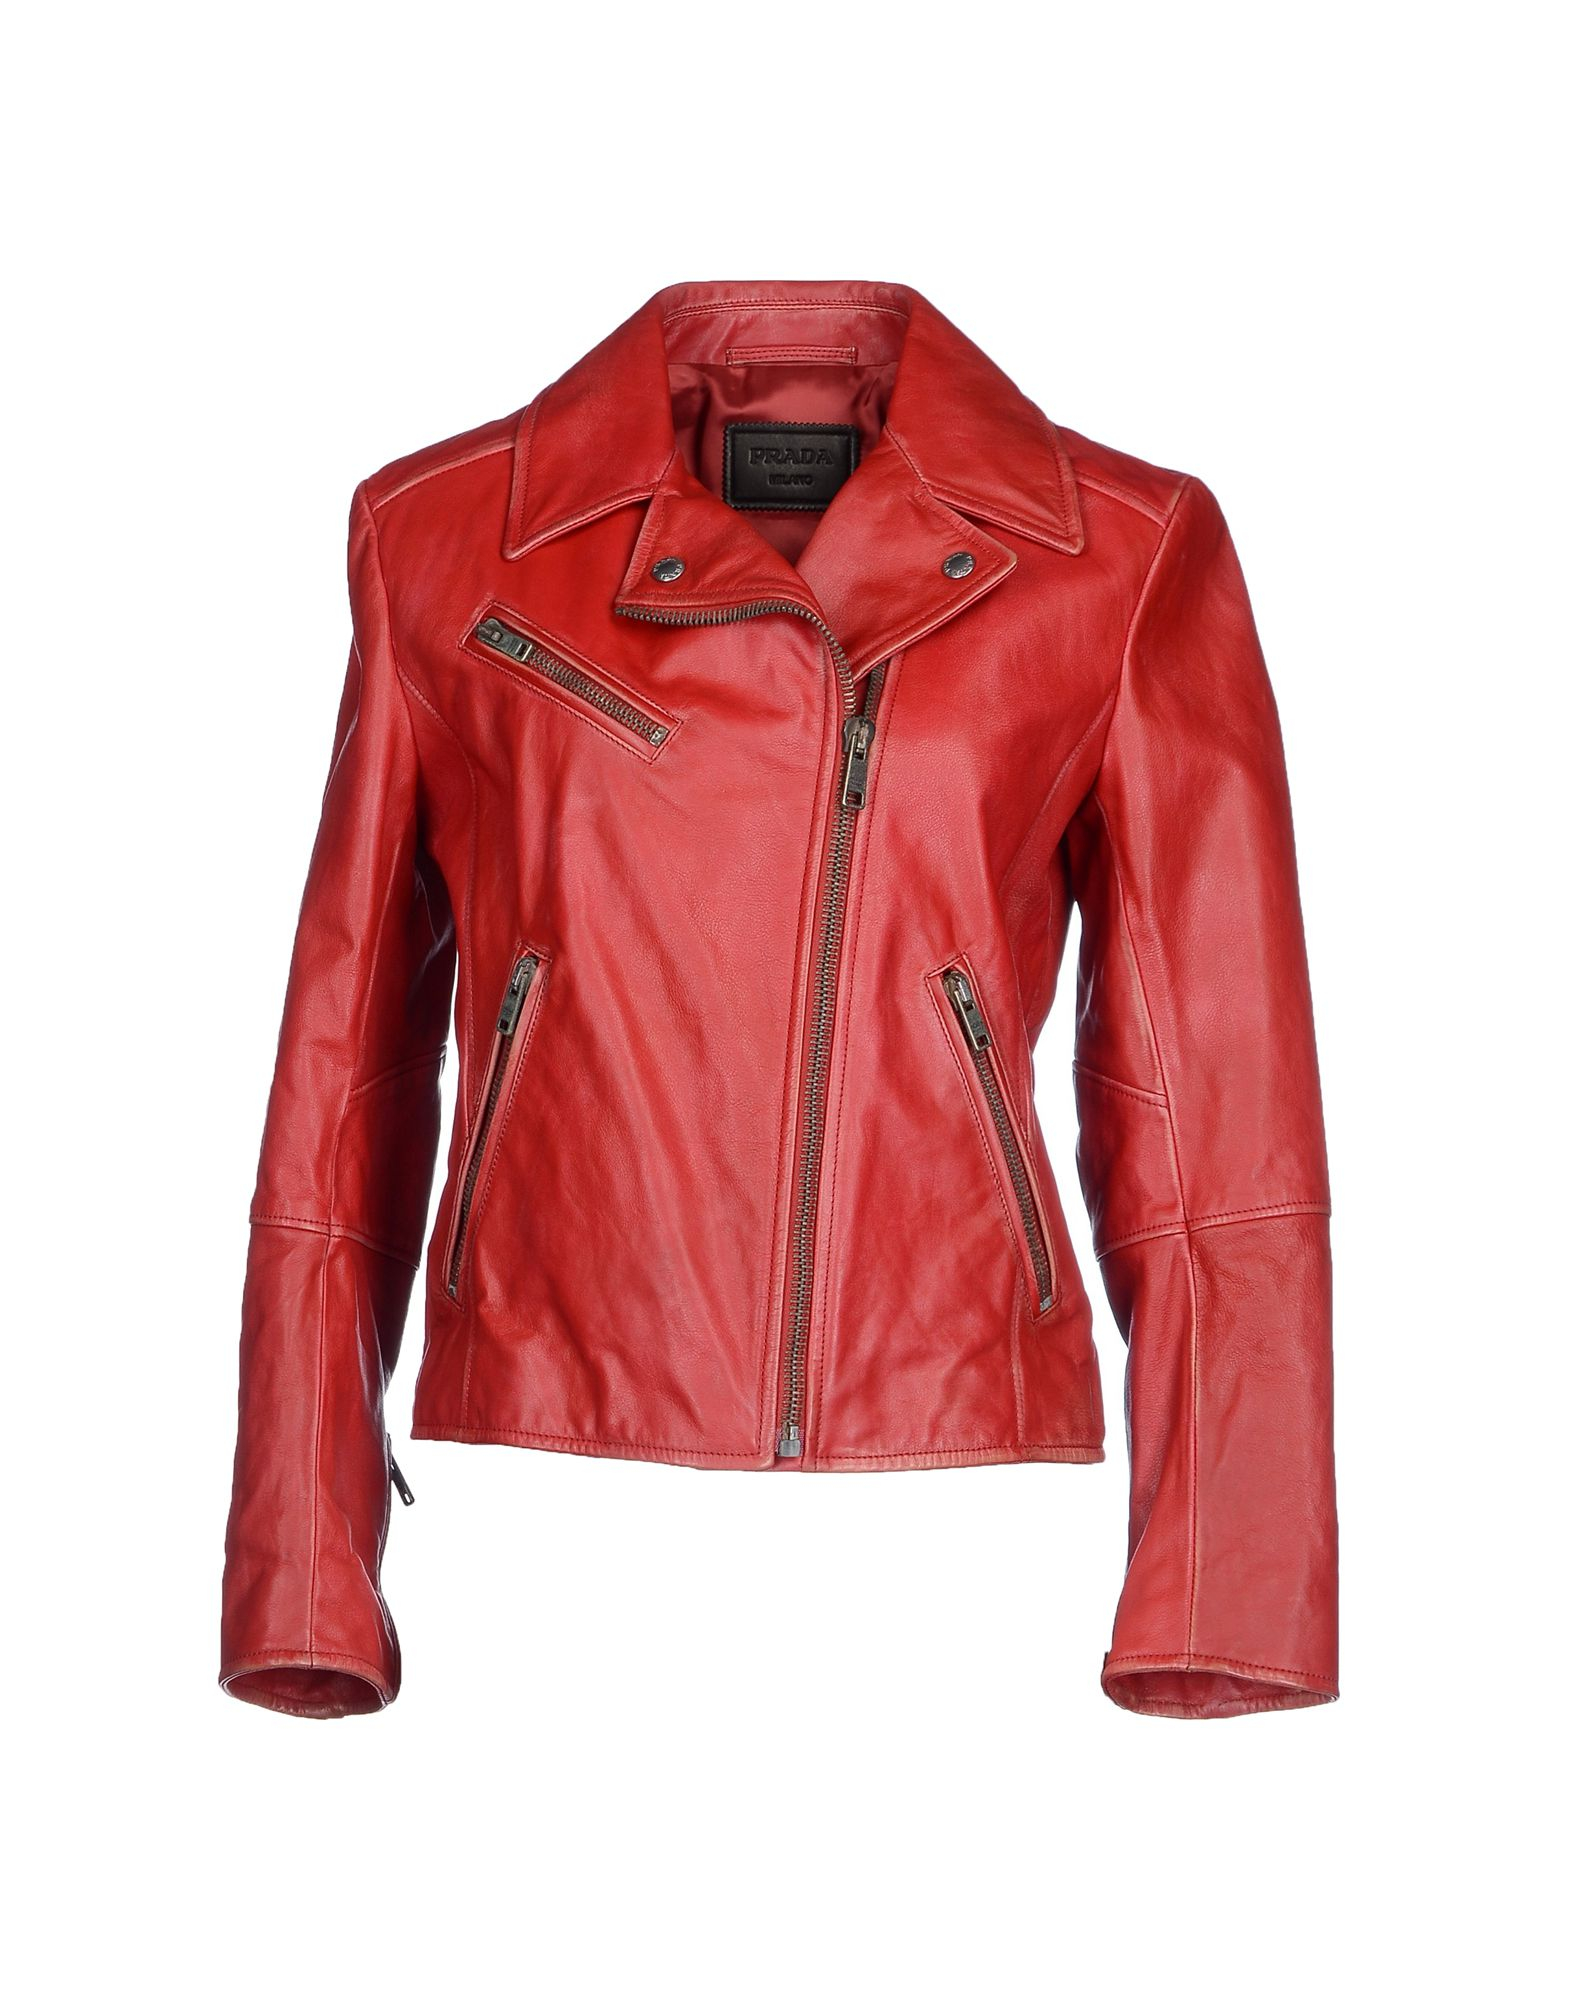 Prada Leather Jacket in Red - Lyst